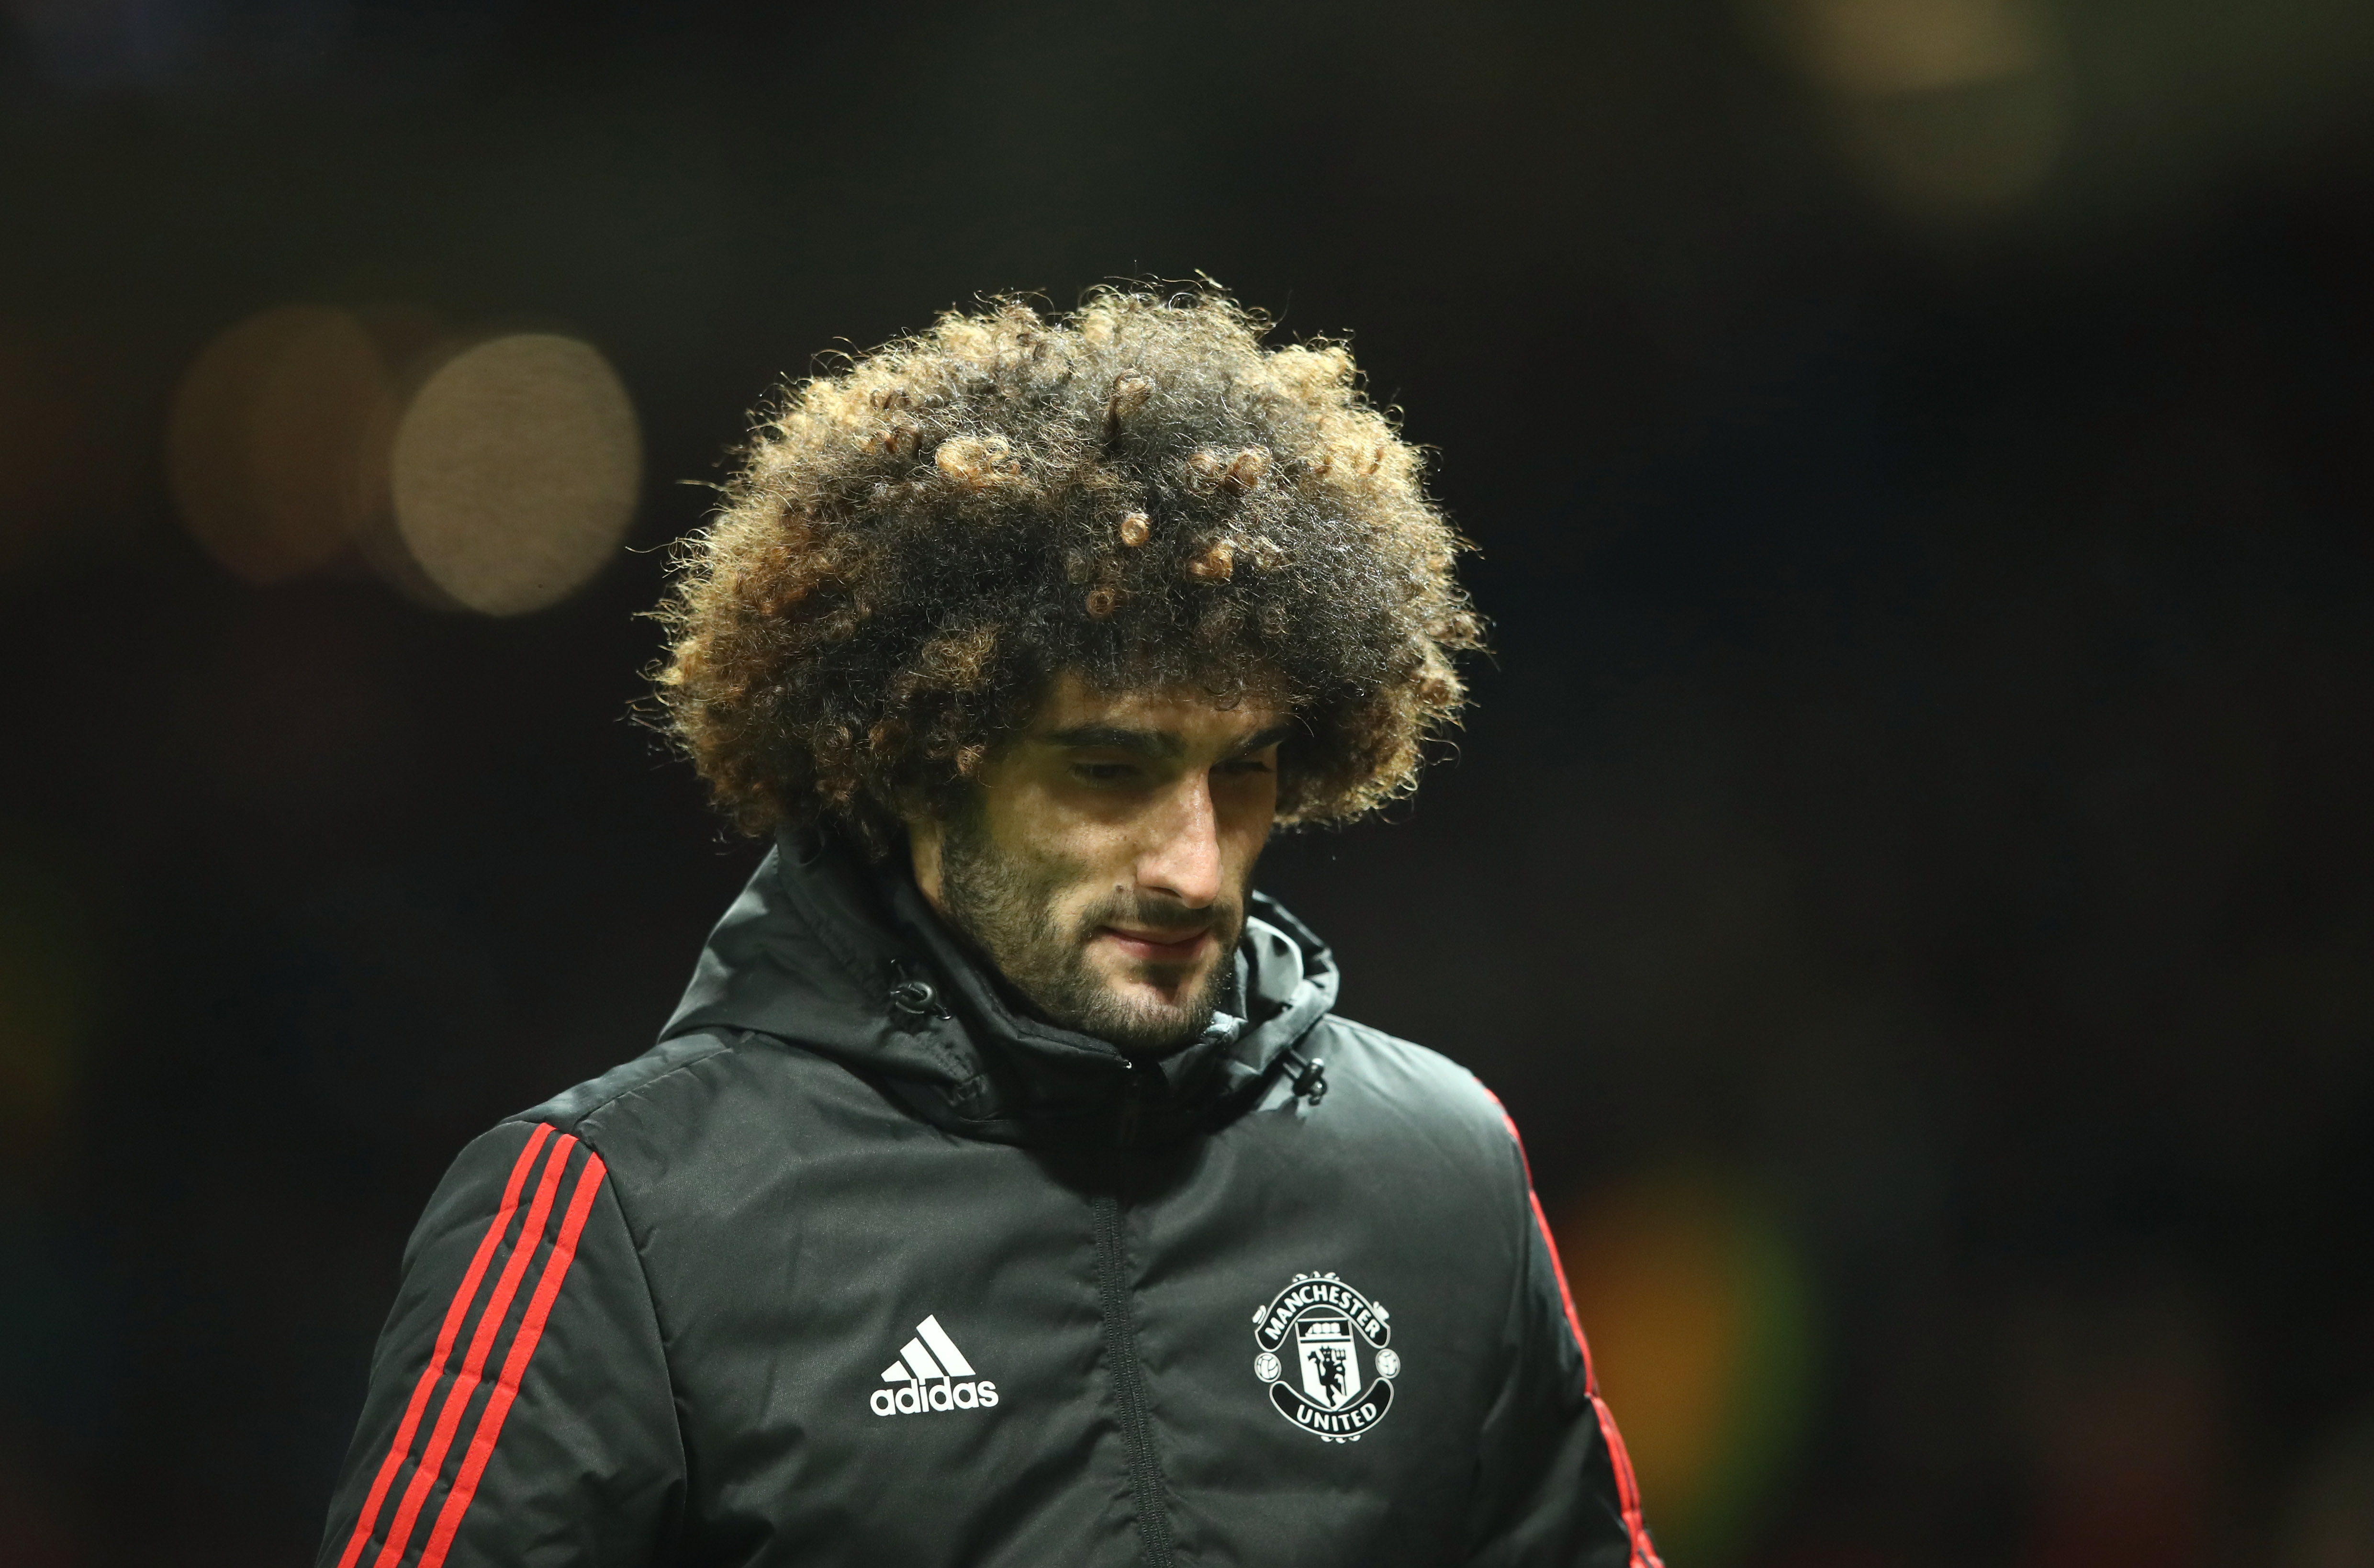 MANCHESTER, ENGLAND - MARCH 13:  Marouane Fellaini of Manchester United looks dejected in defeat after the UEFA Champions League Round of 16 Second Leg match between Manchester United and Sevilla FC at Old Trafford on March 13, 2018 in Manchester, United Kingdom.  (Photo by Clive Mason/Getty Images)